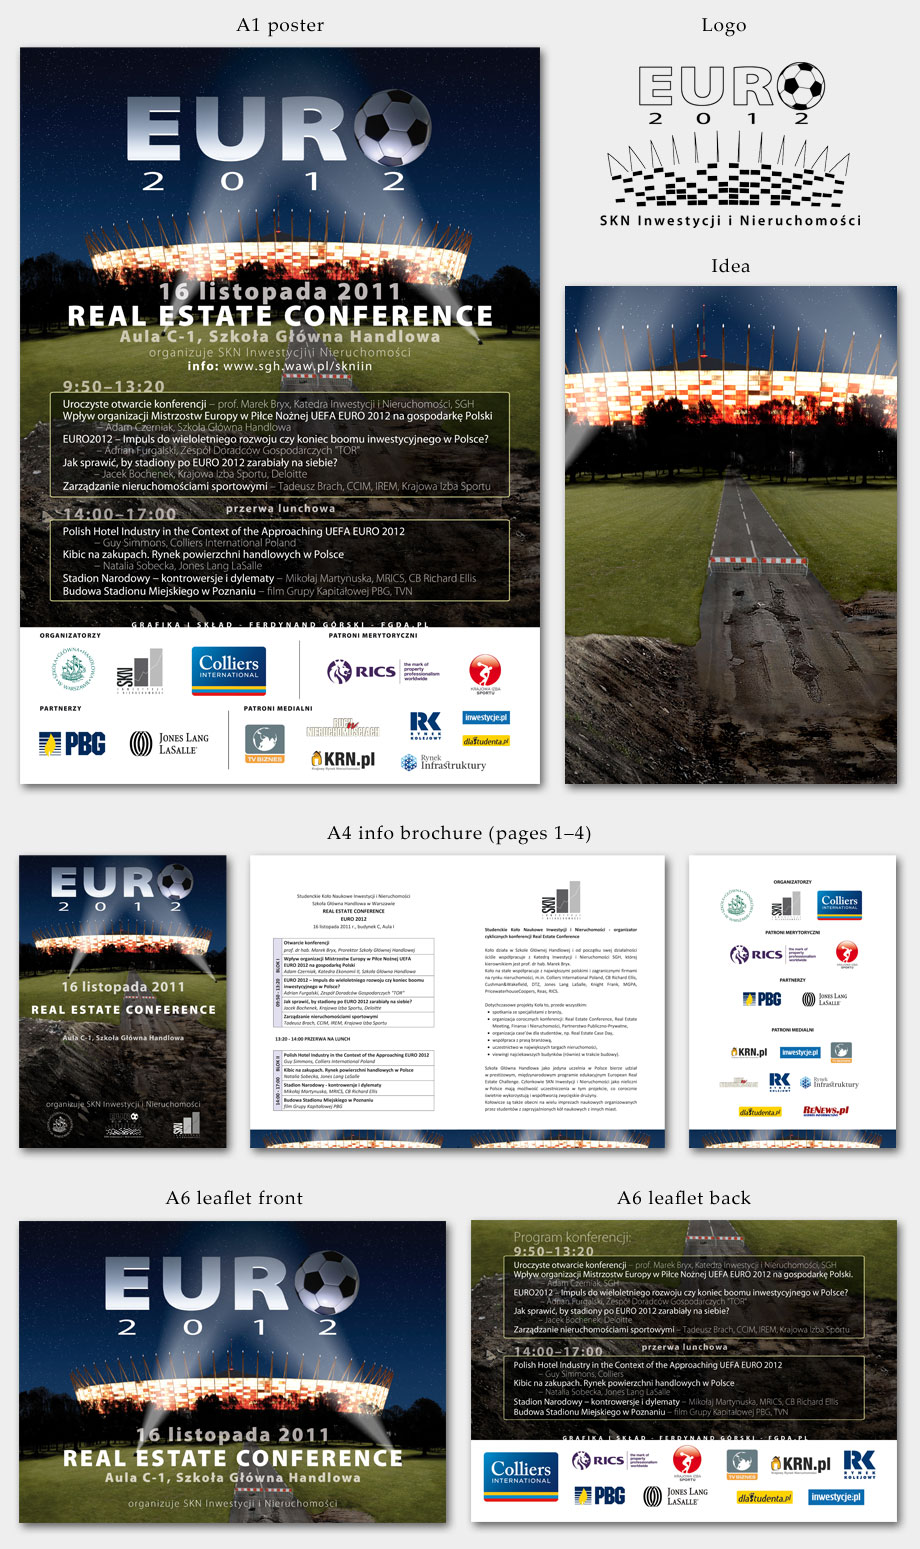 Real Estate Conference 2011 graphics - the road to Euro 2012